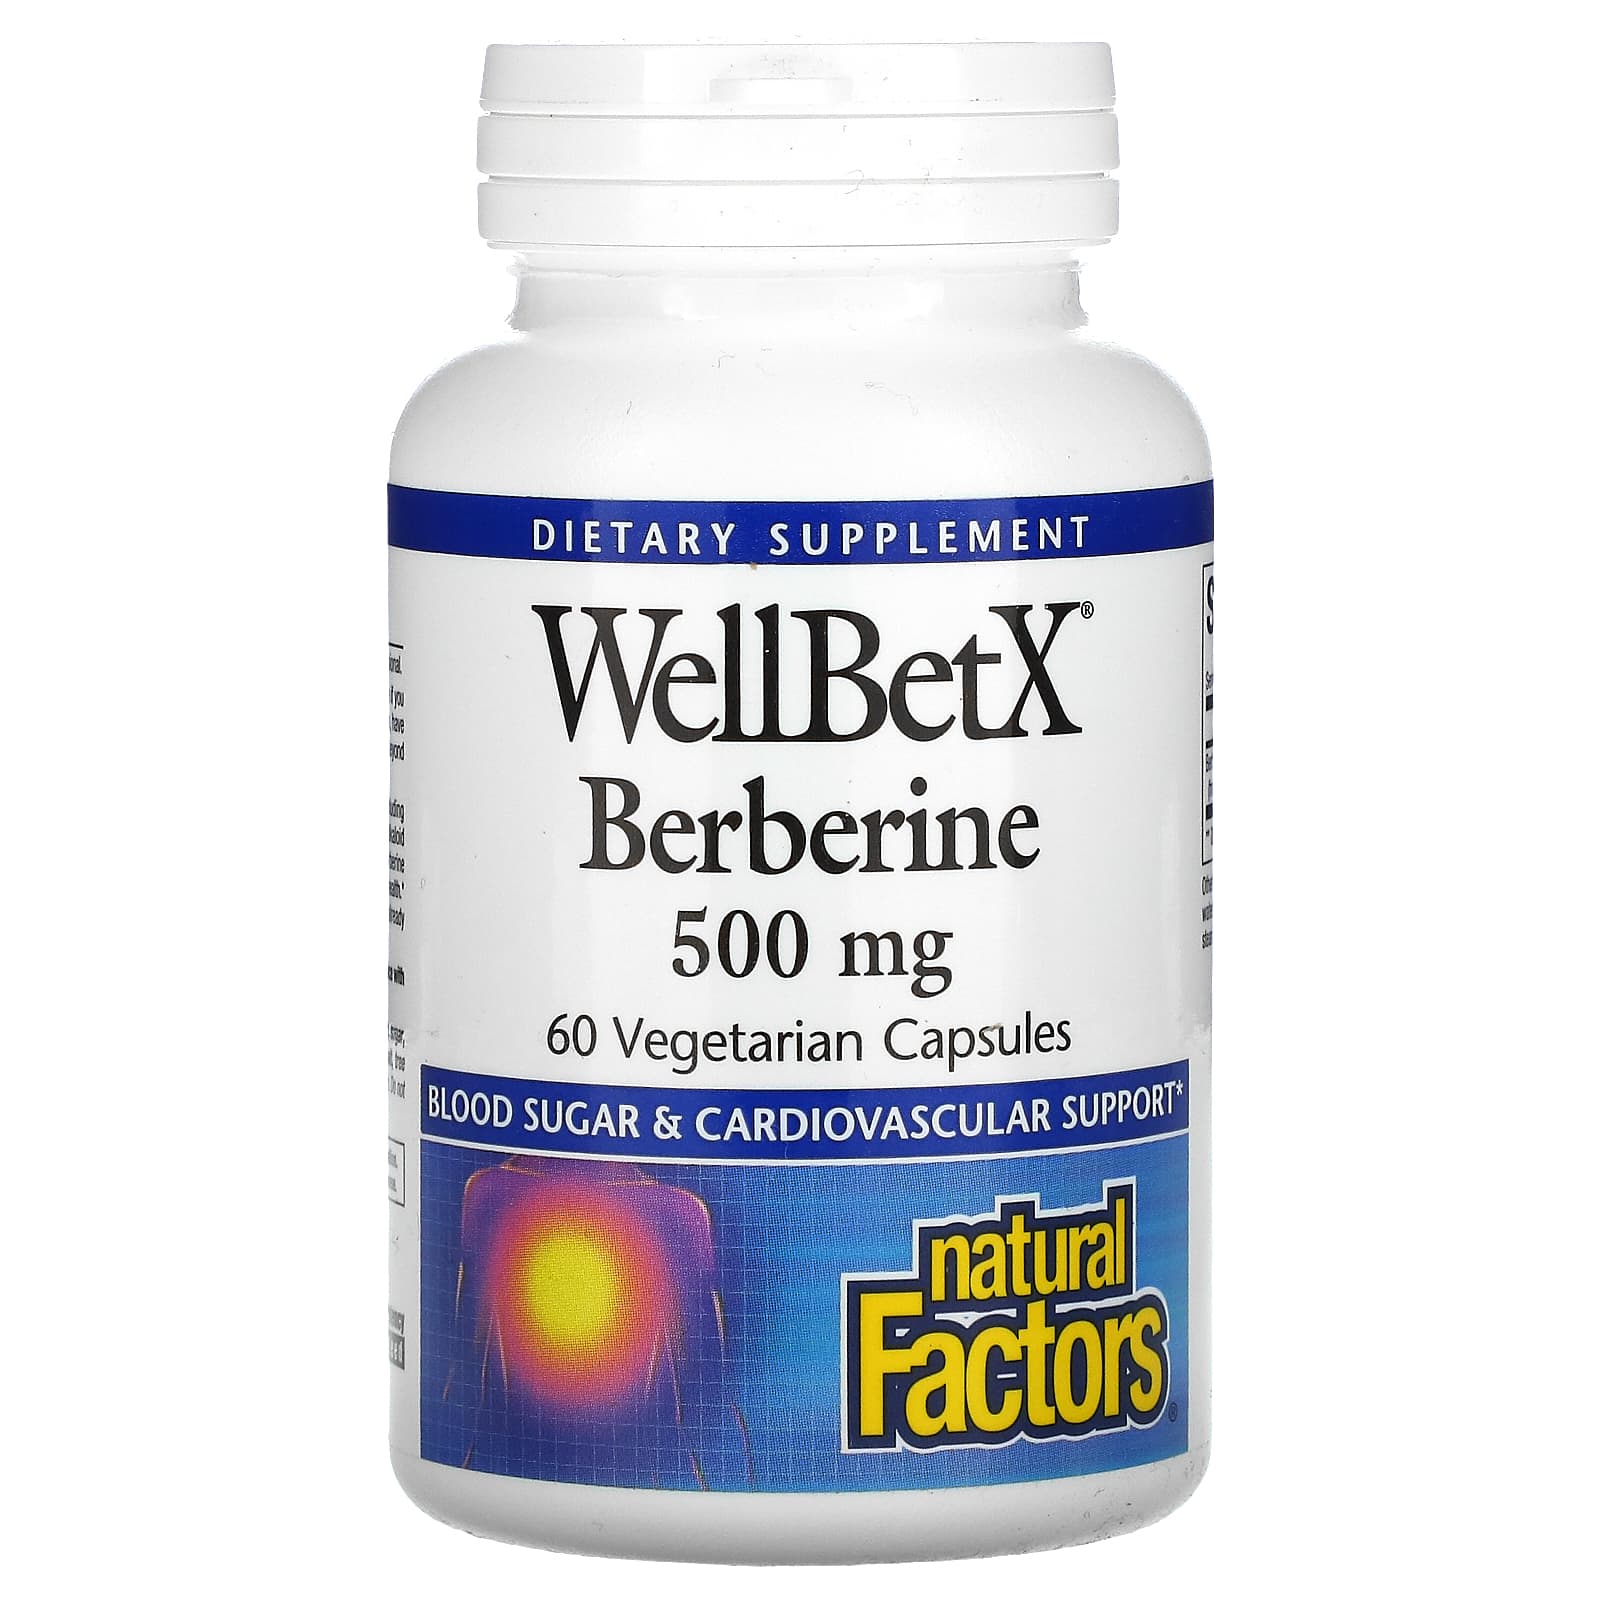 Natural Factors WellBetX Berberine 500 Mg By For Healthy Blood Sugar And Cholesterol Levels Already Within The Normal Range, 60 Vegetarian Capsules (60 Servings)